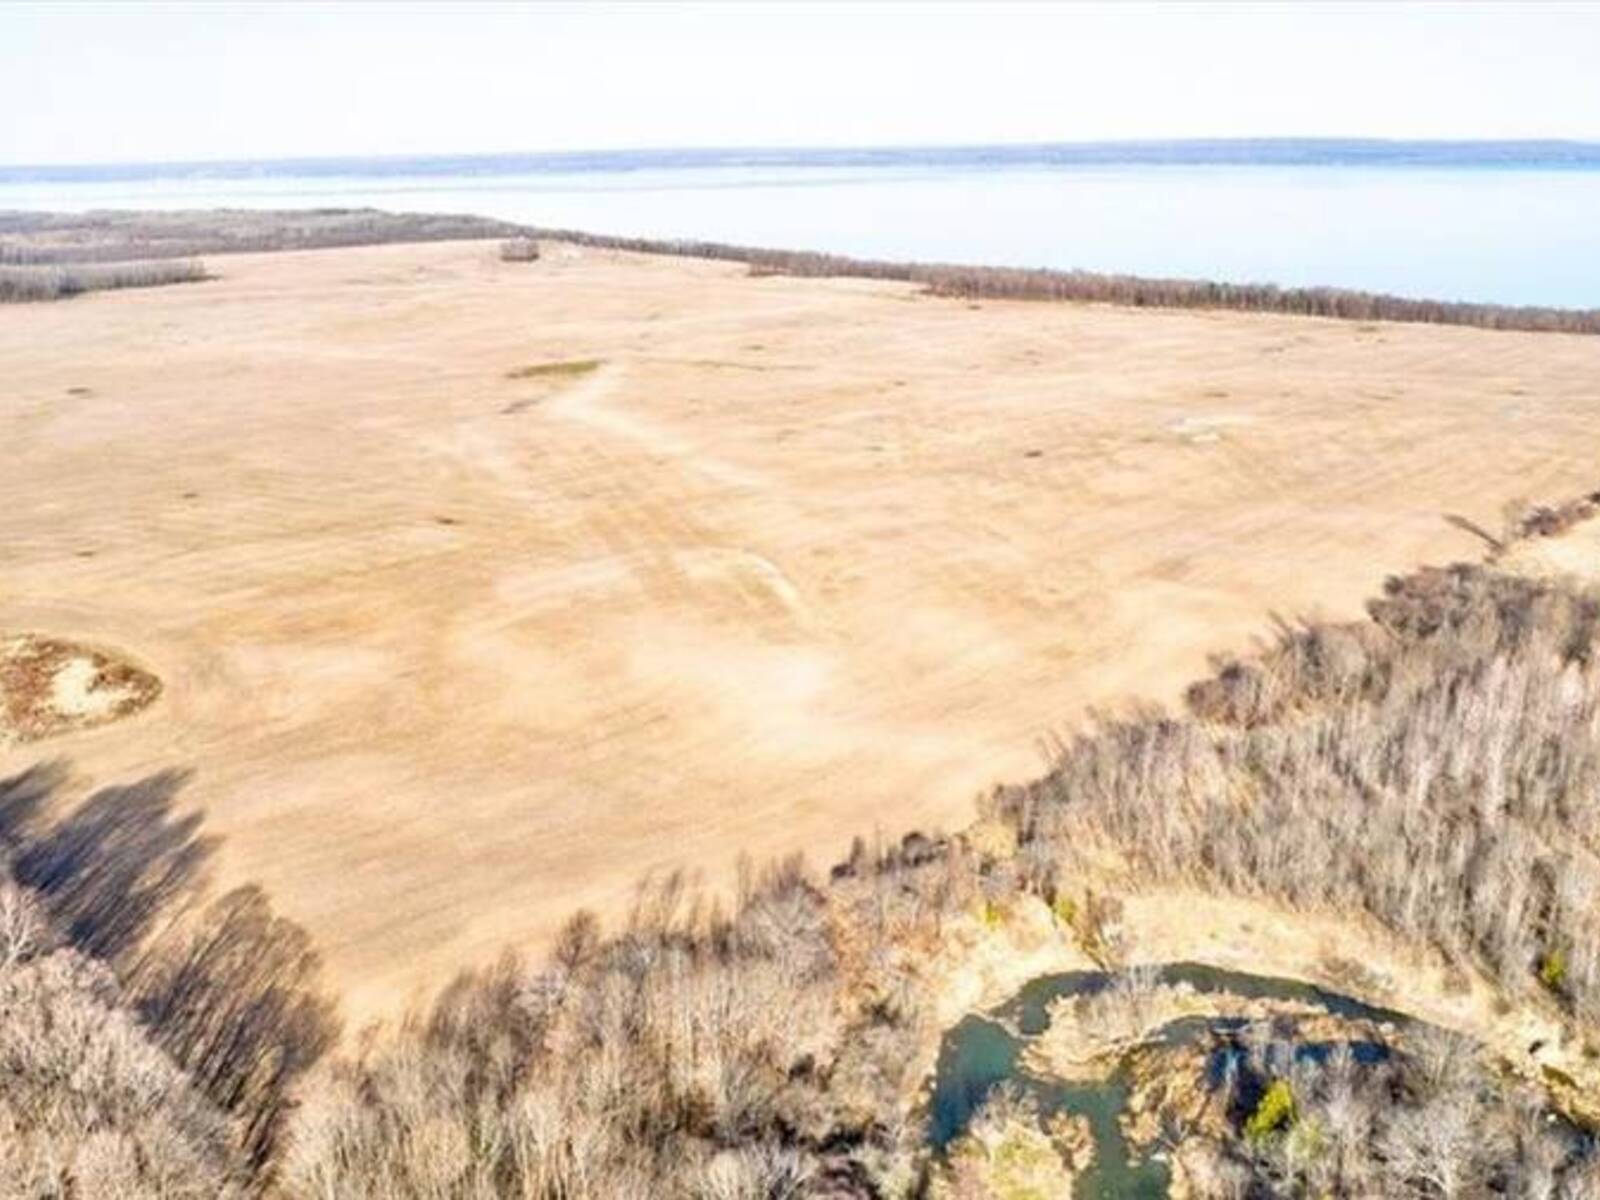 PT LT 11-12 CONCESSION ROAD A, Meaford, Ontario N0H 1B0